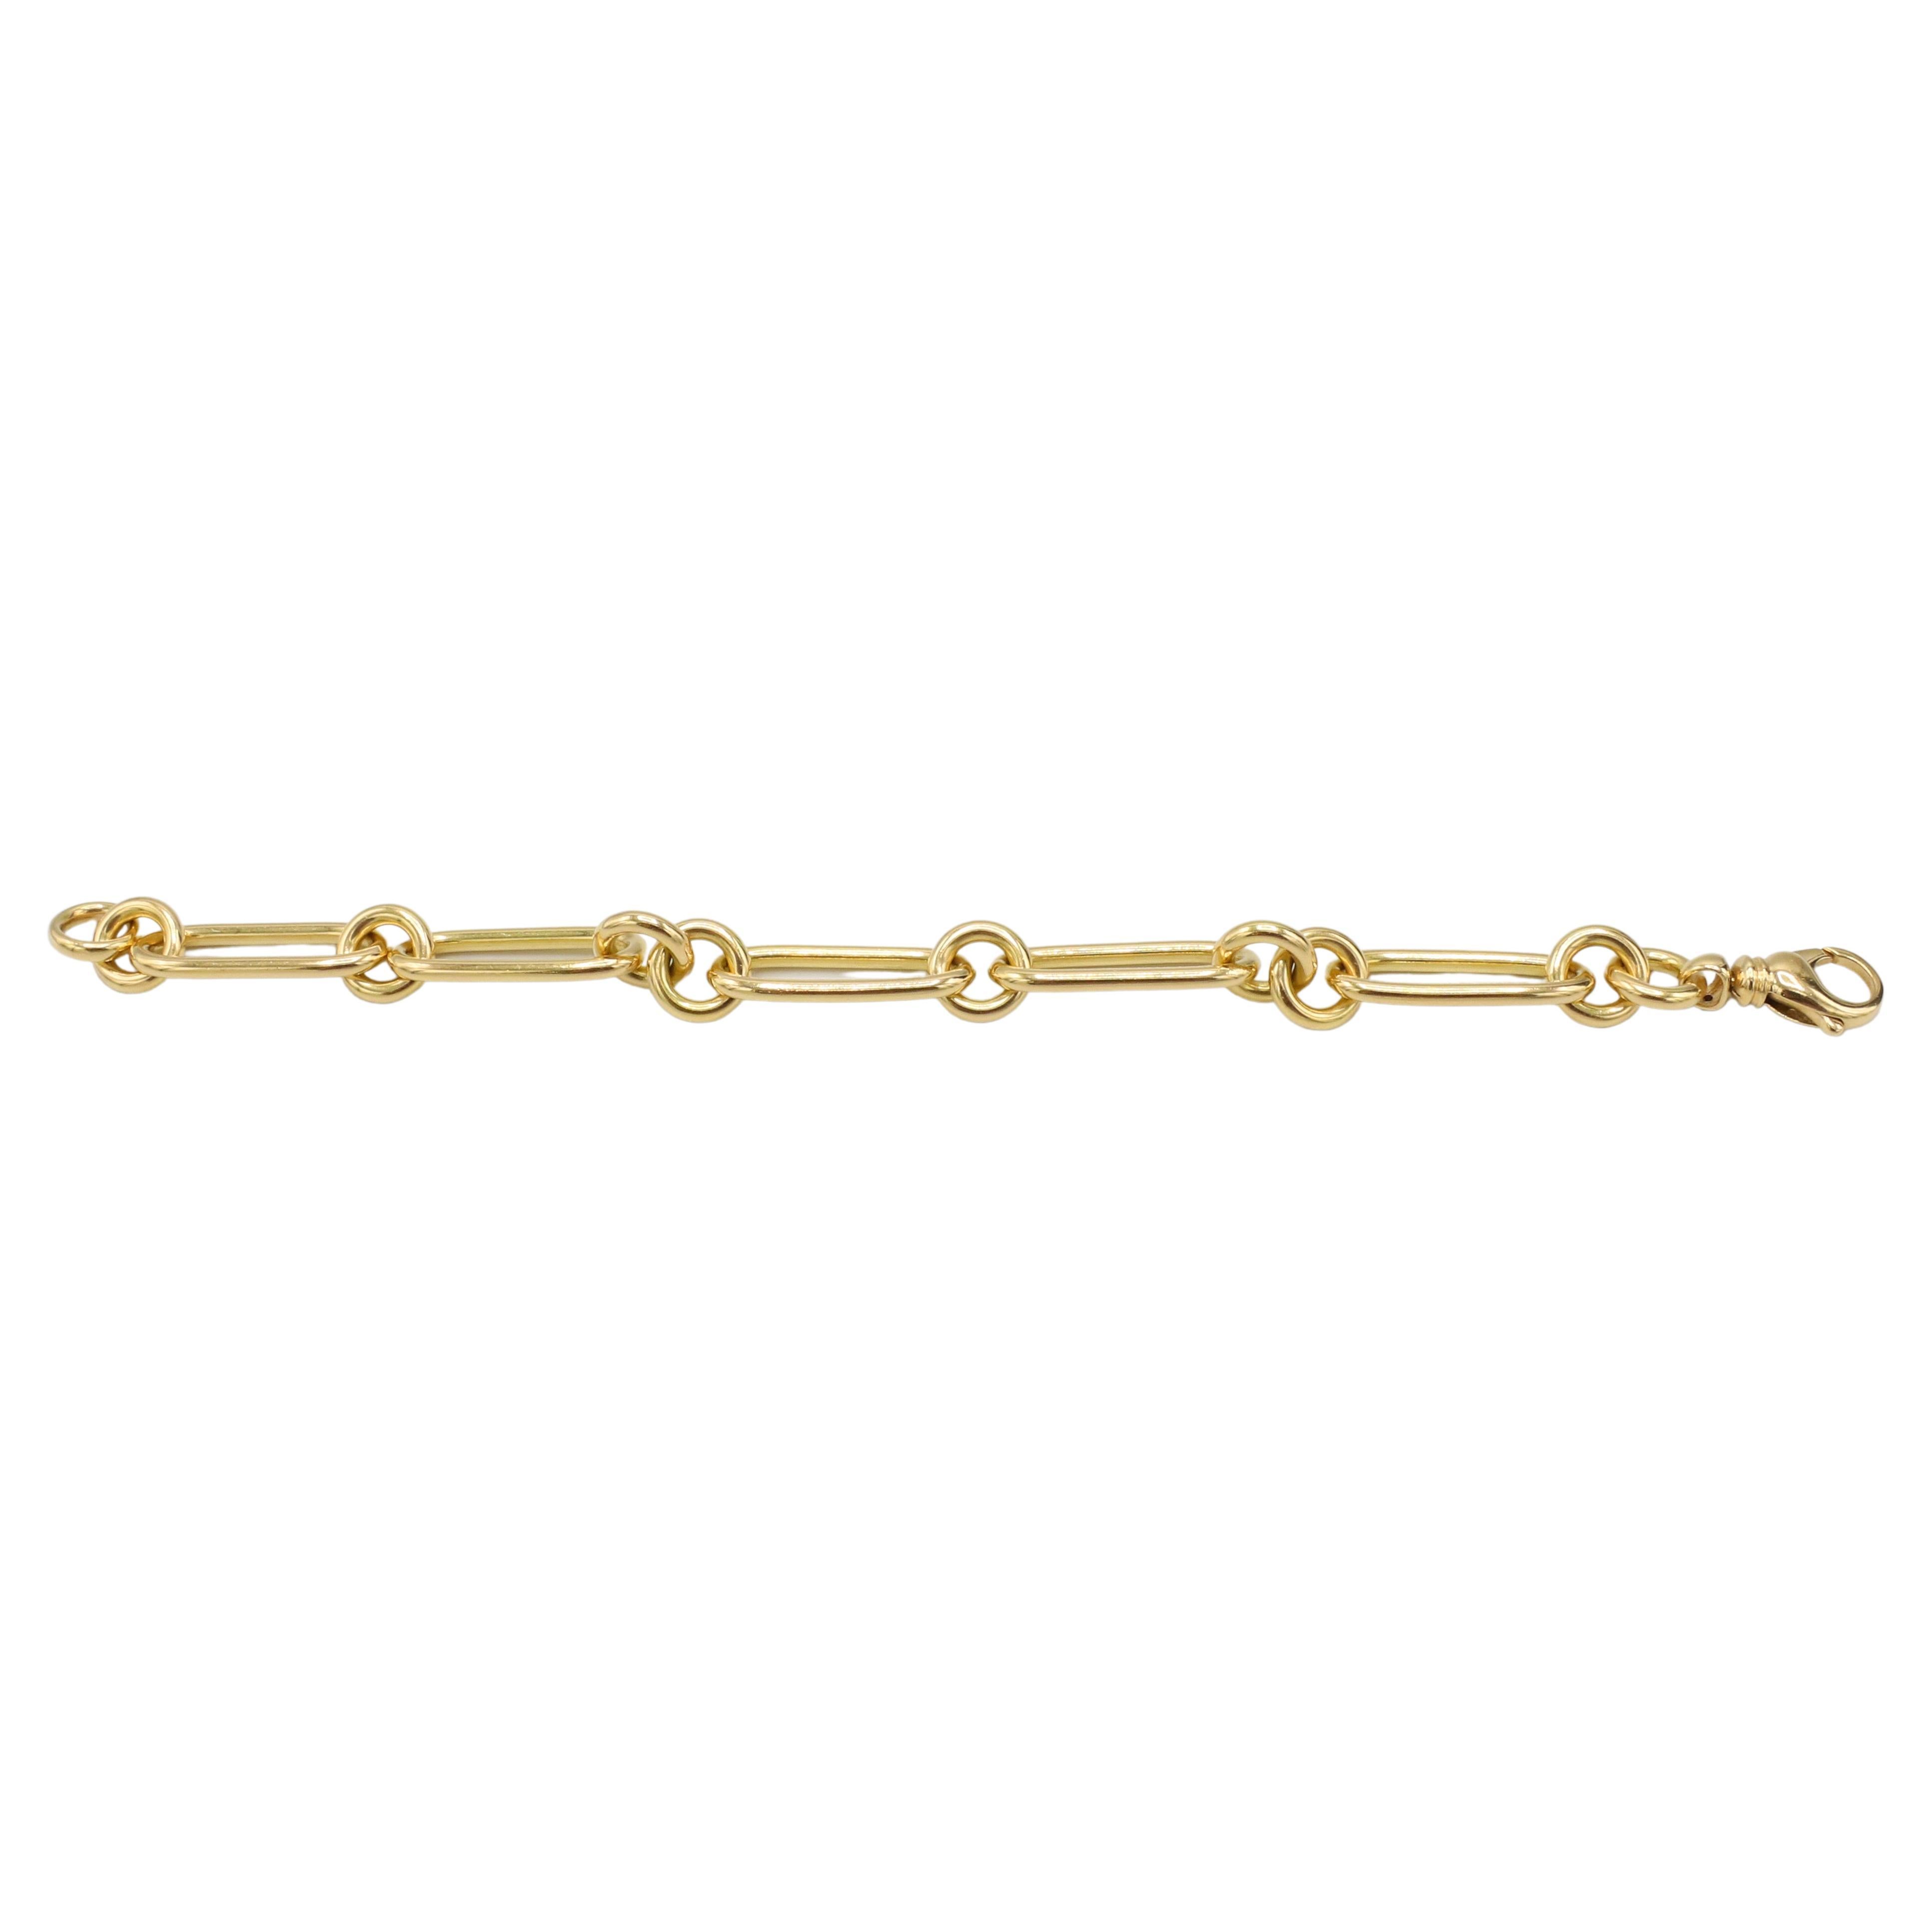 Roberto Coin 18 Karat Yellow Gold Designer Oval & Round Paperclip Link Bracelet 
Metal: 18k yellow gold
Weight: 17.74 grams
Length: 8 inches
Links: Oval links, 30mm, round links, 10mm
Signed: RC 18K Italy 
Retail: $5,100 USD

